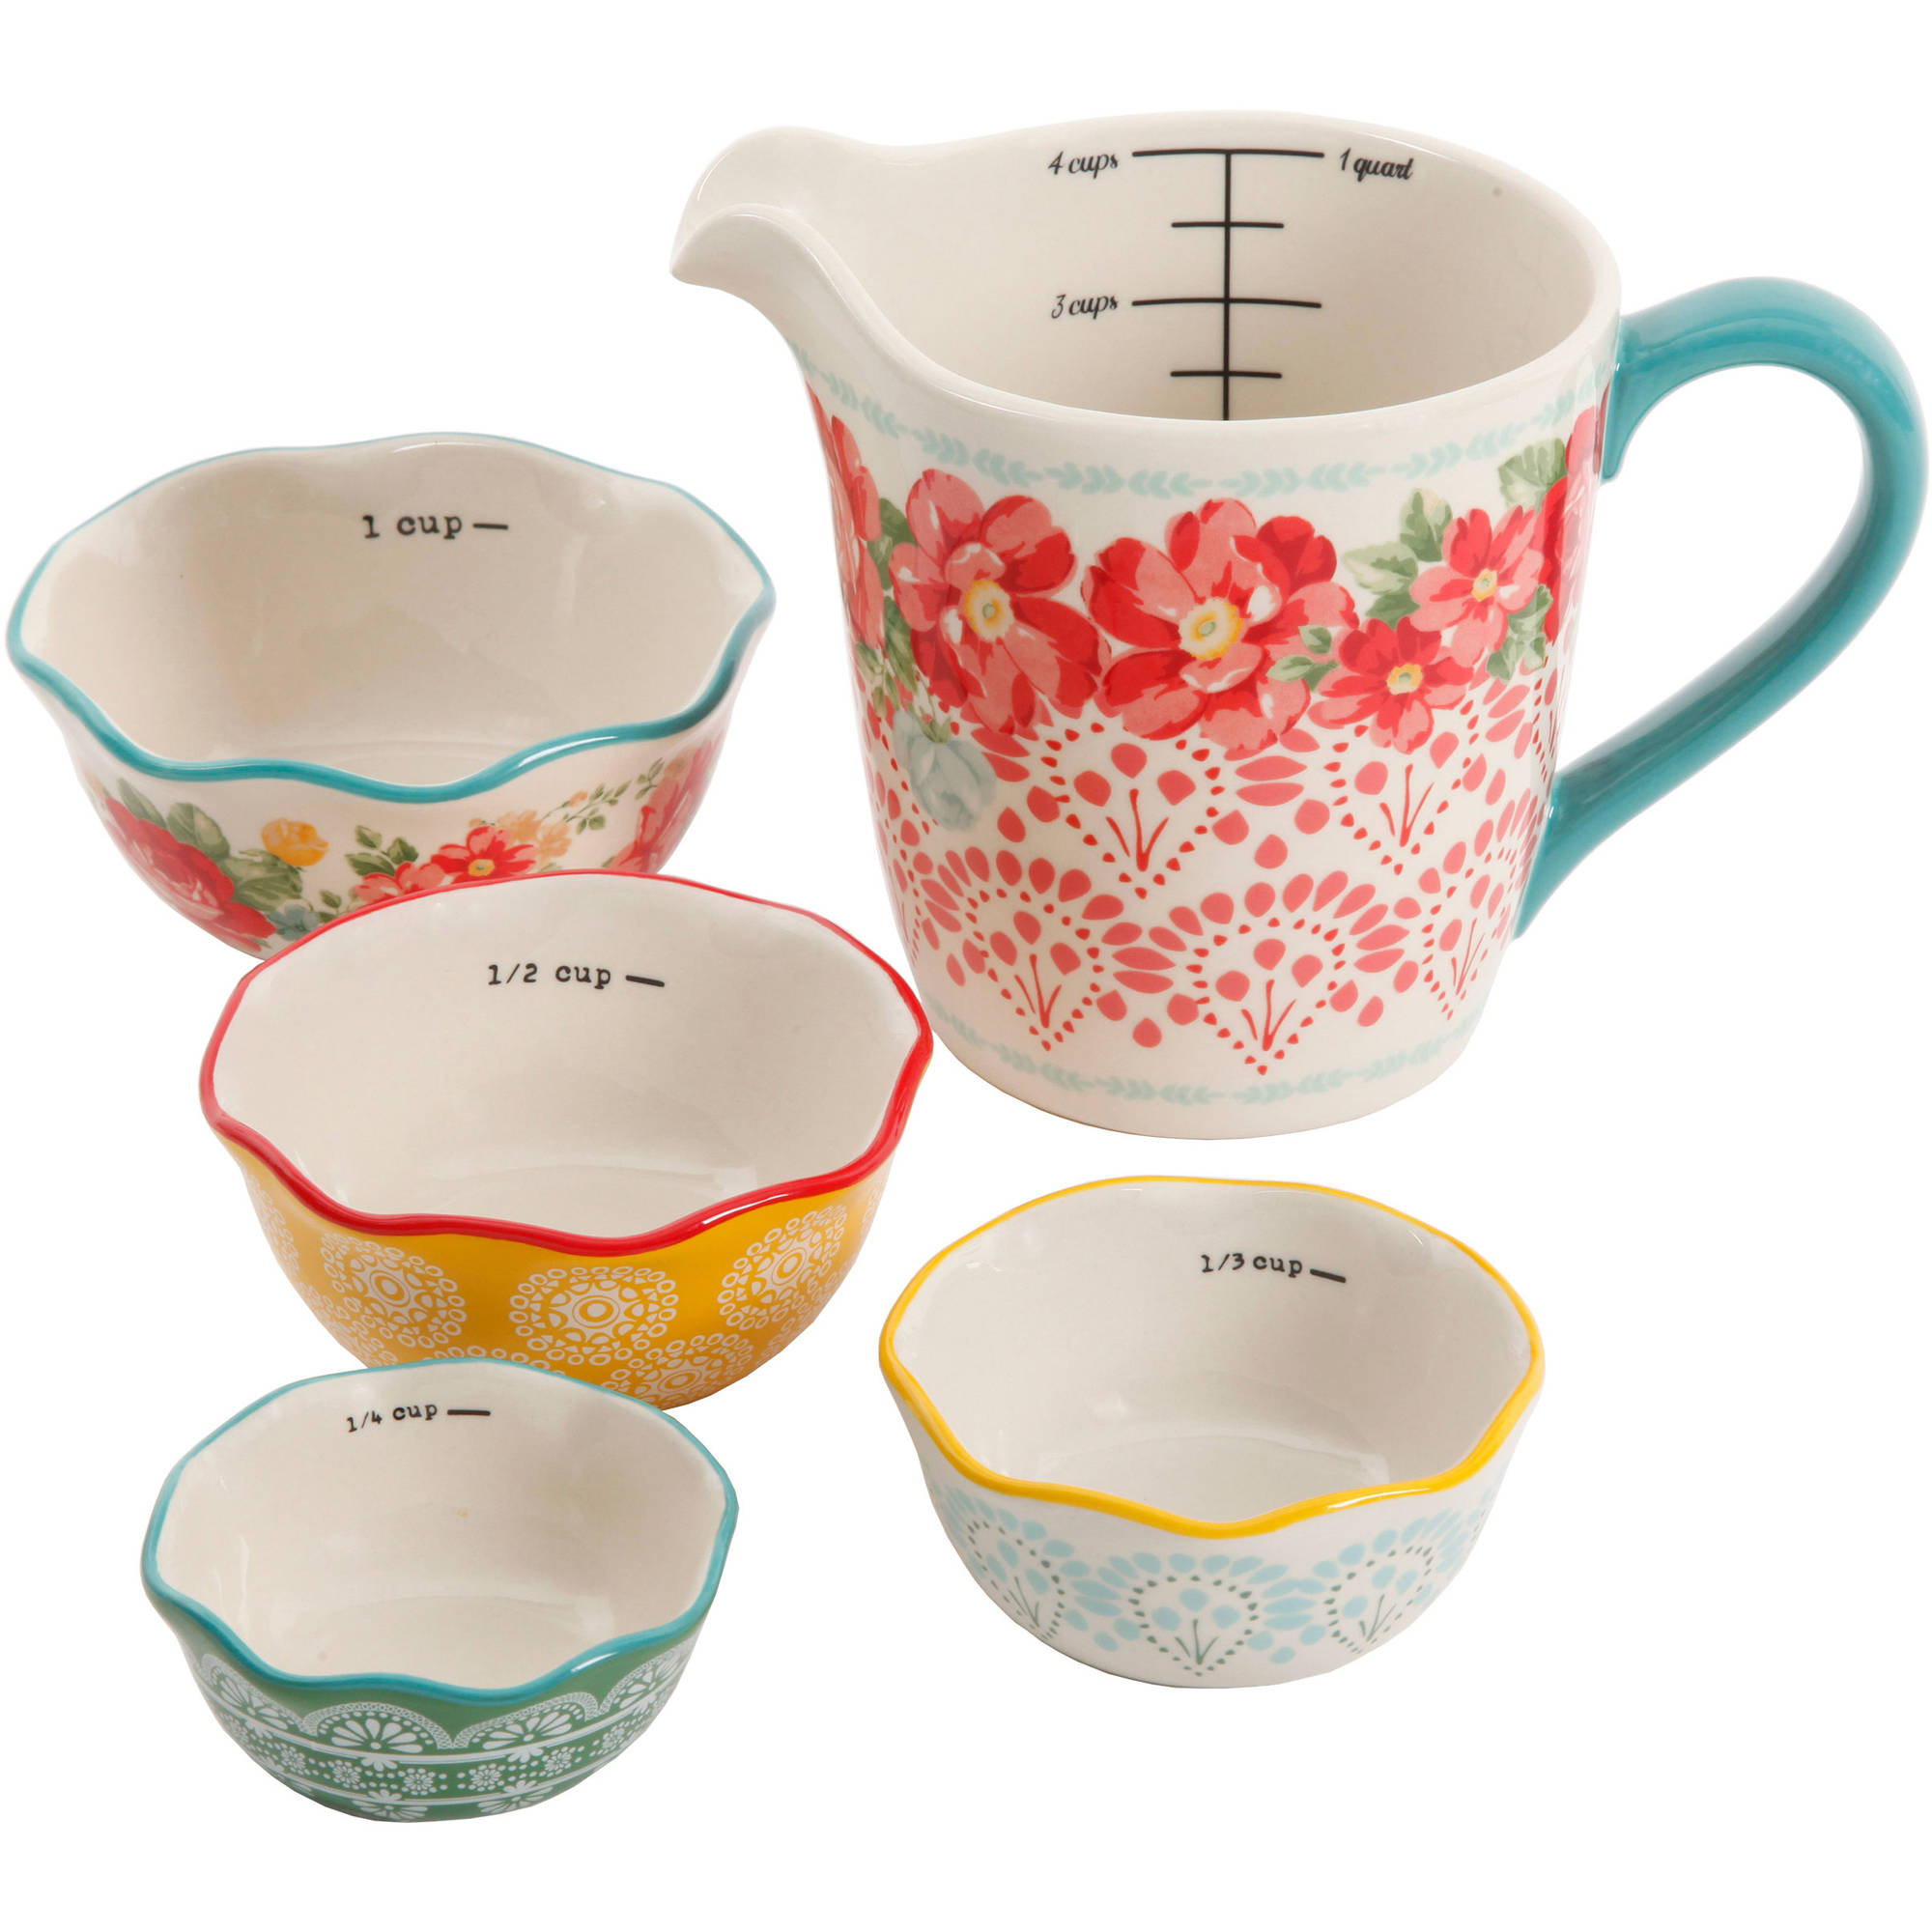 The Pioneer Woman 5-Piece Prep Set, Measuring Bowls & Cup - image 1 of 9